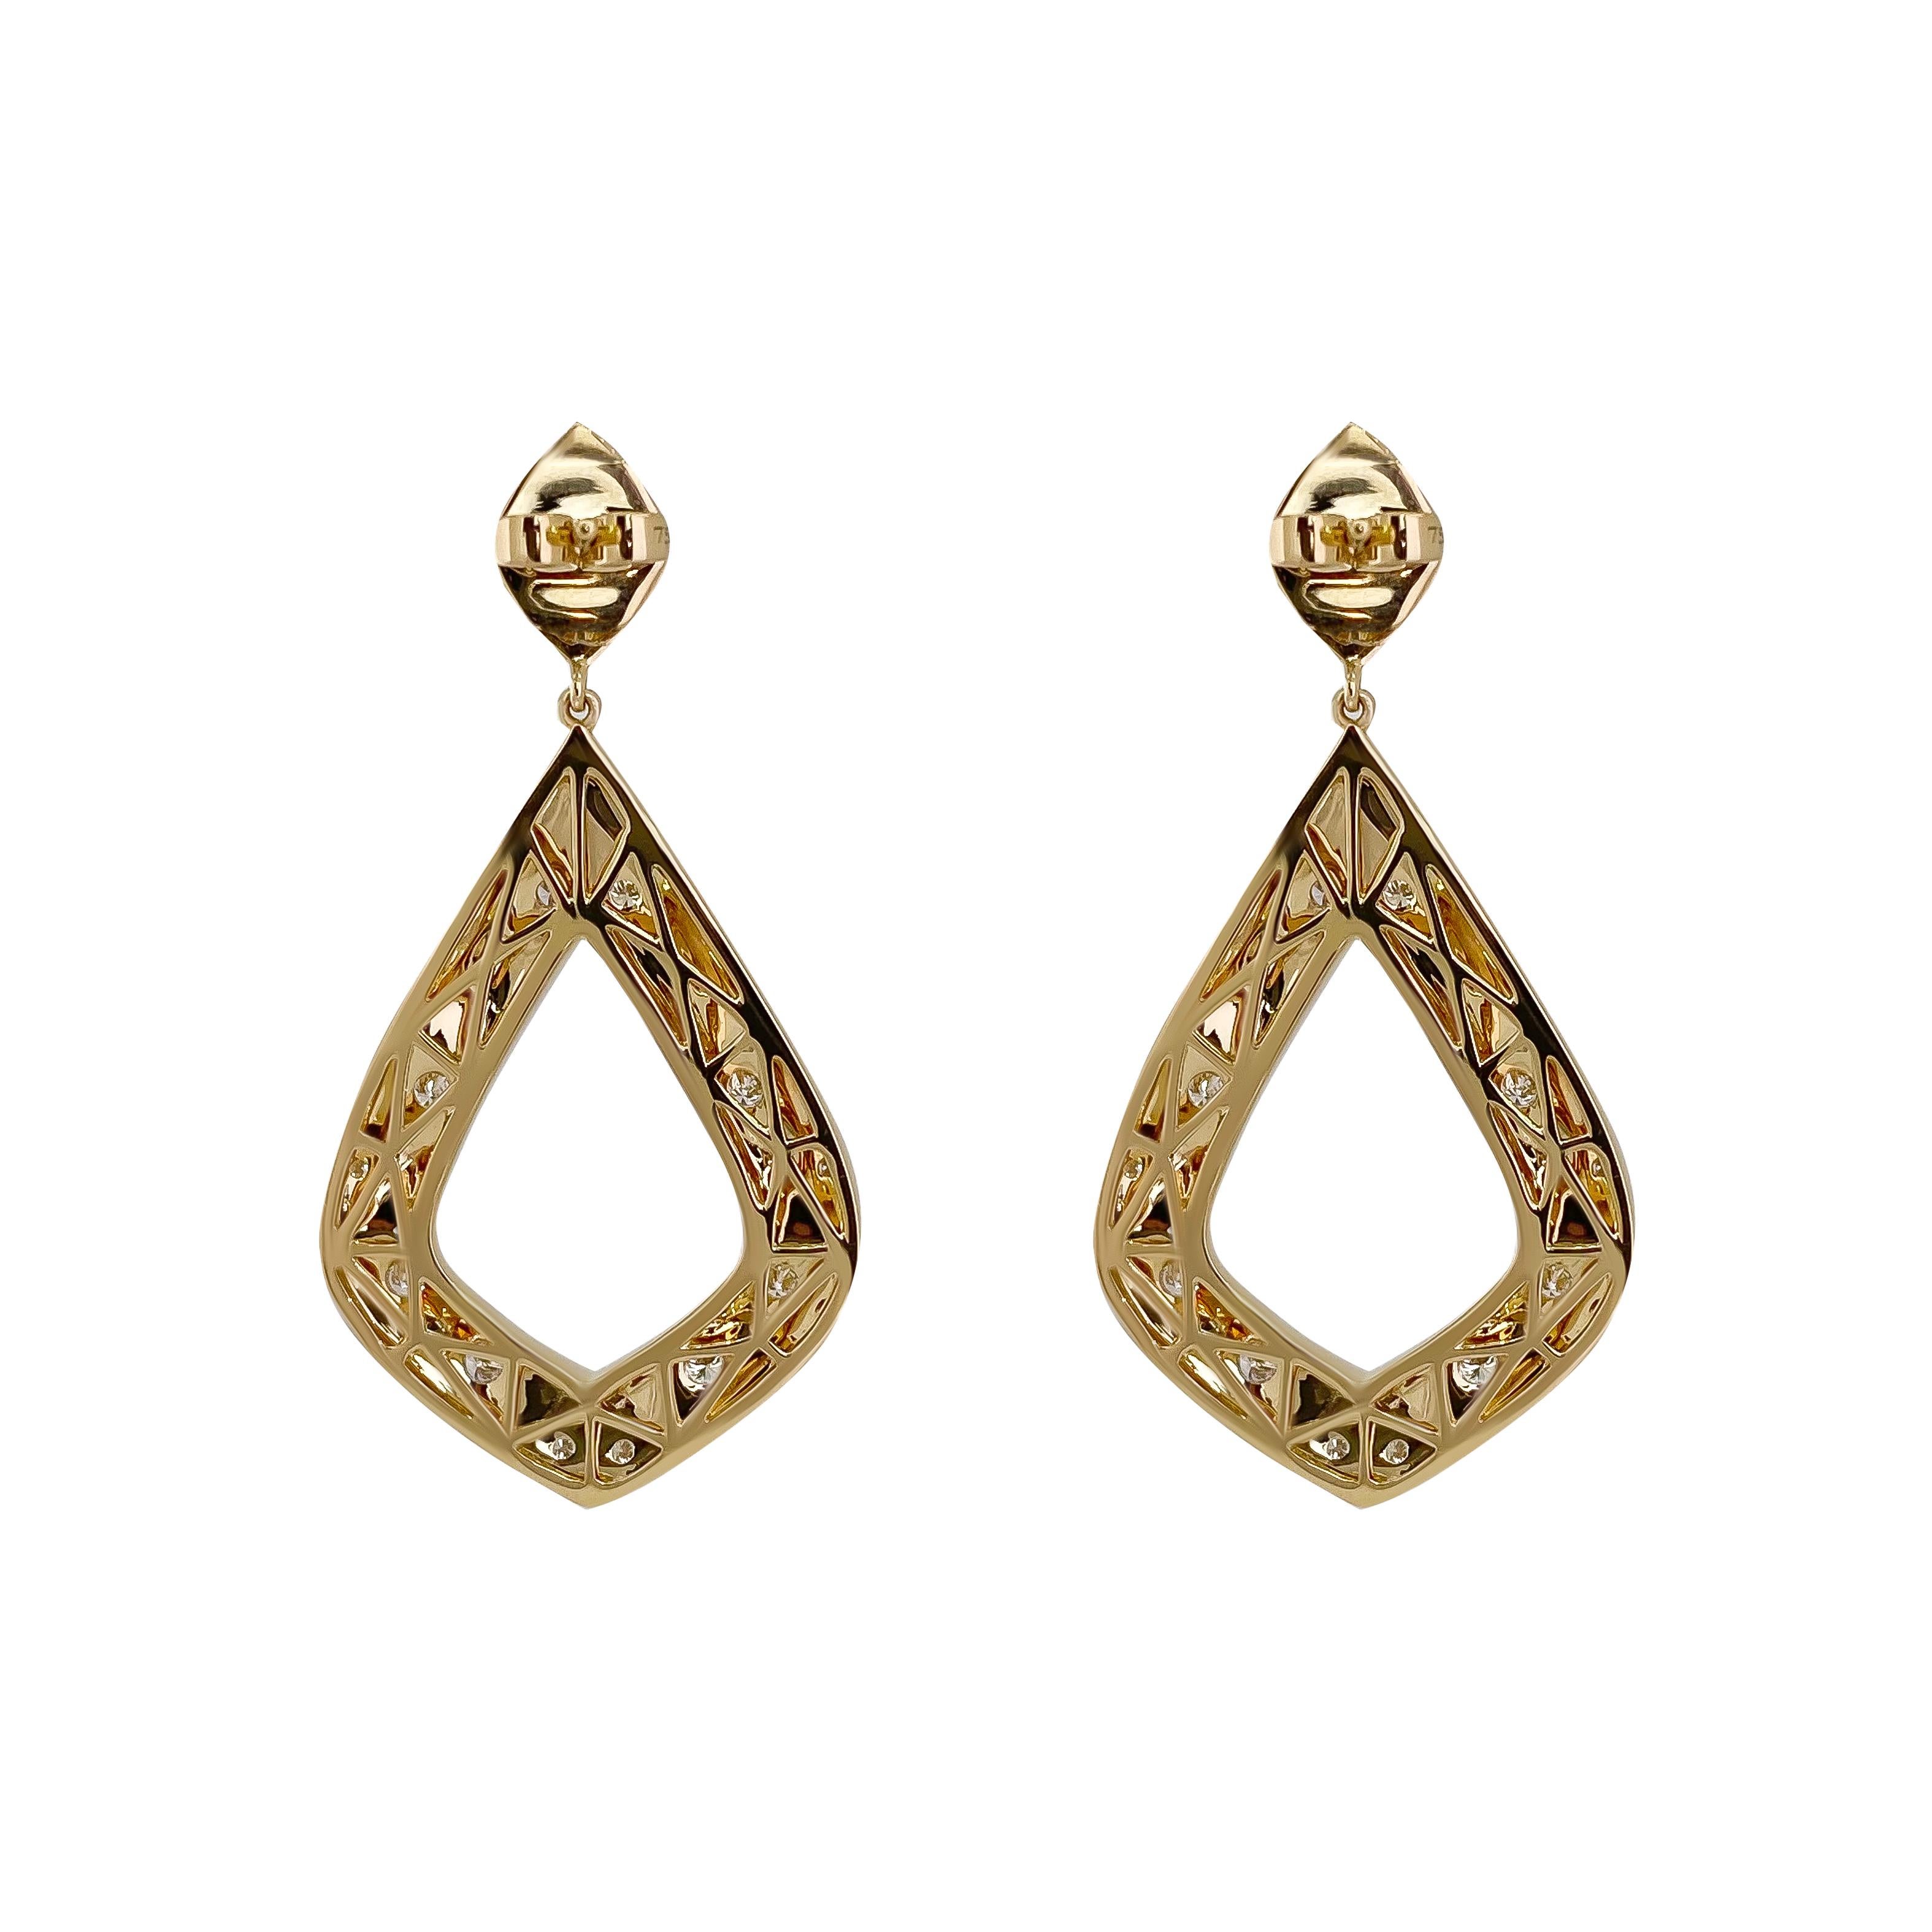 These earrings are part of the ORIGAMI collection. They were inspired by geometric aesthetics giving the earrings texture and dimension. The earrings are made with solid 18k yellow gold and a high polished shine. 30pcs of sprinkled F color diamonds